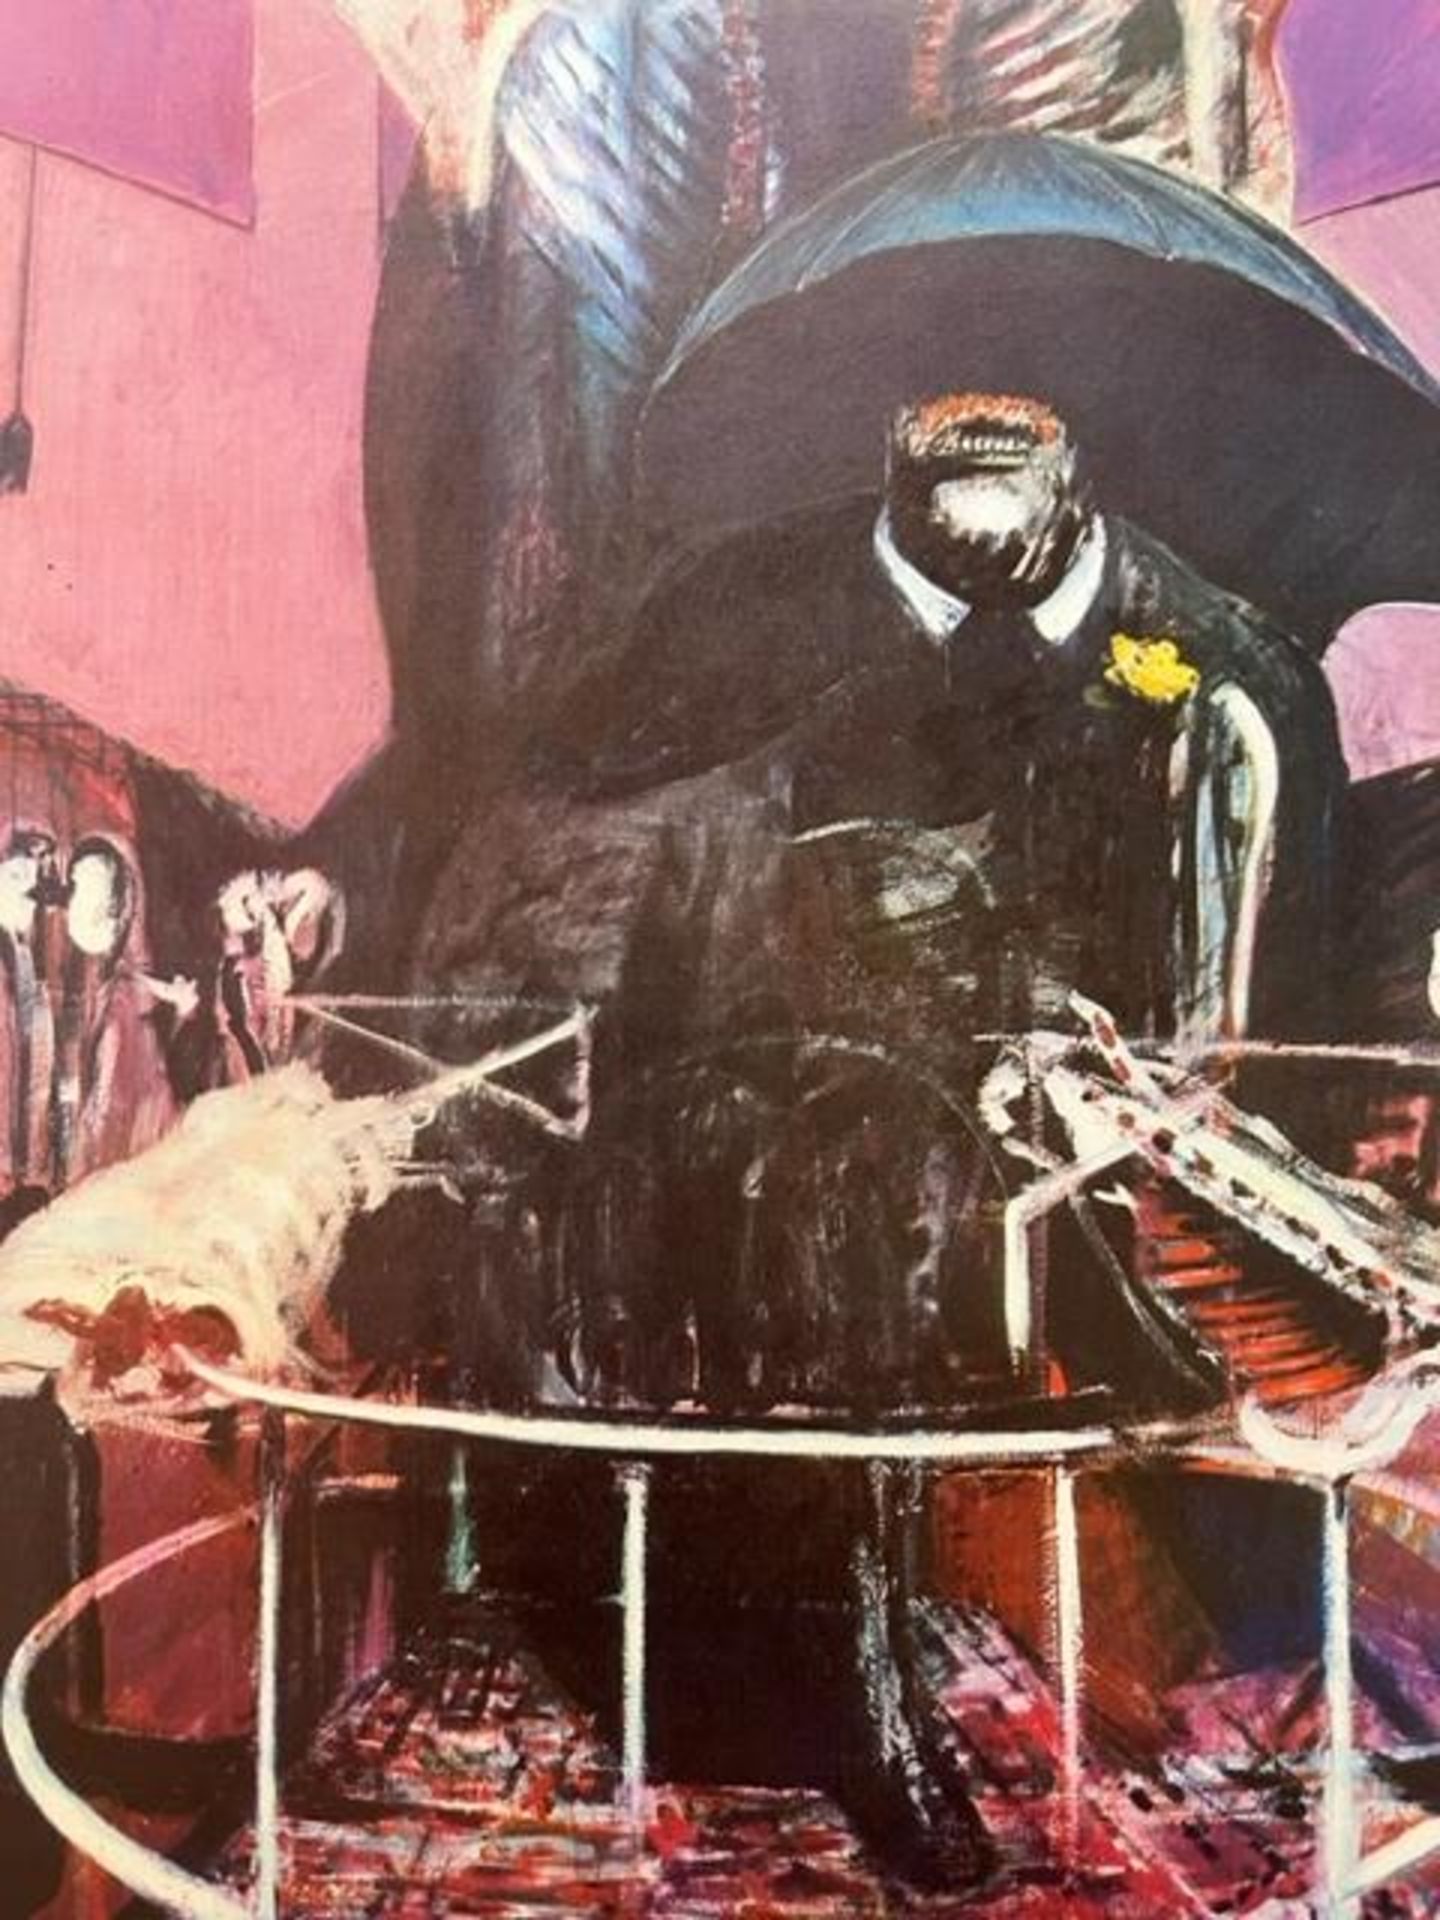 Francis Bacon "Painting" Print. - Image 8 of 12